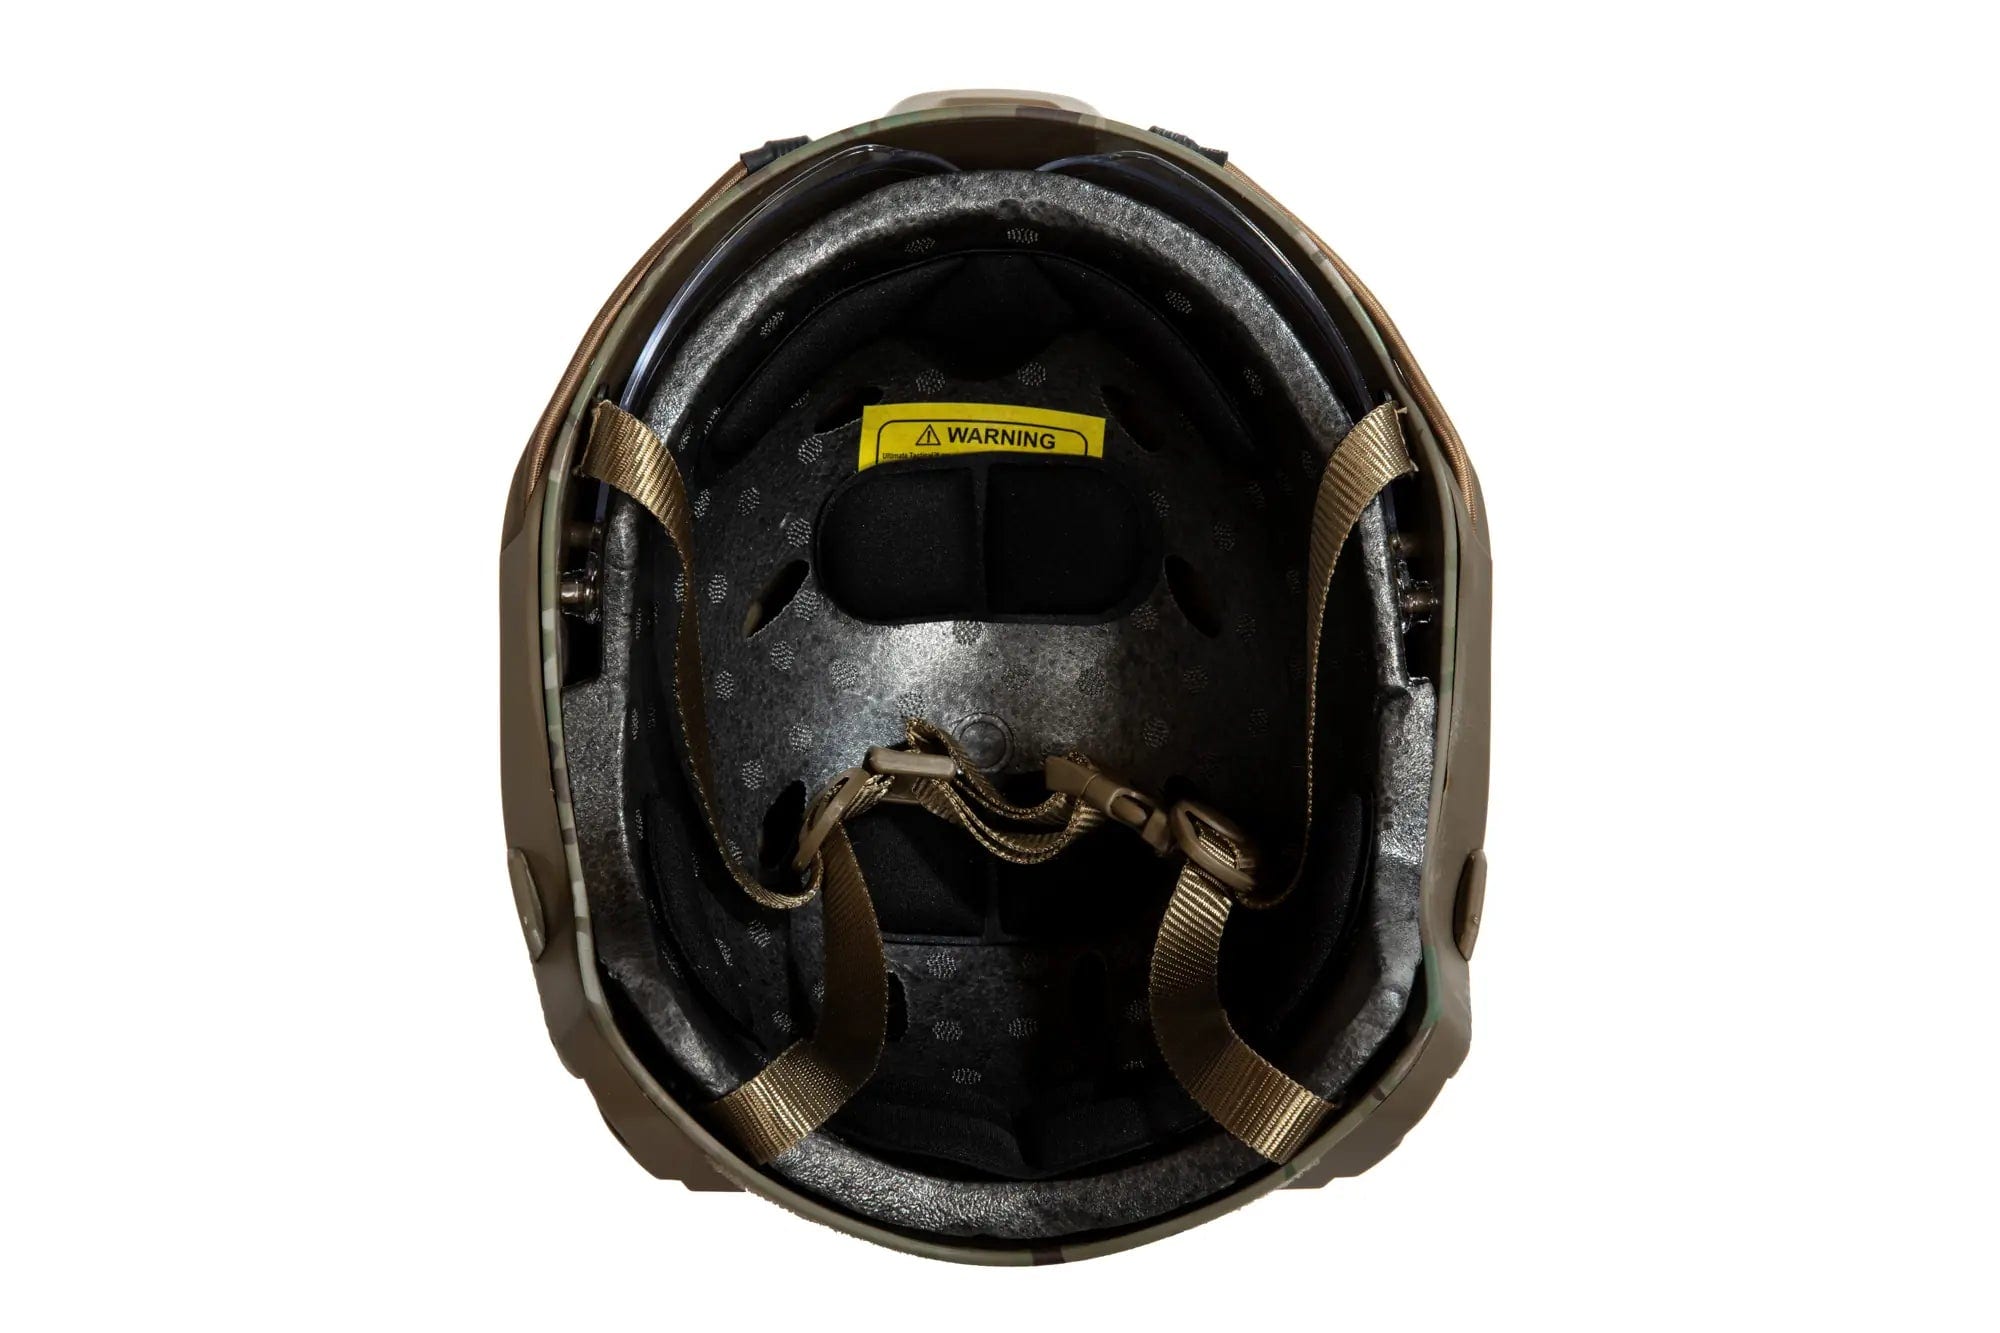 X-Shield MH Helmet With Goggles - Multicam